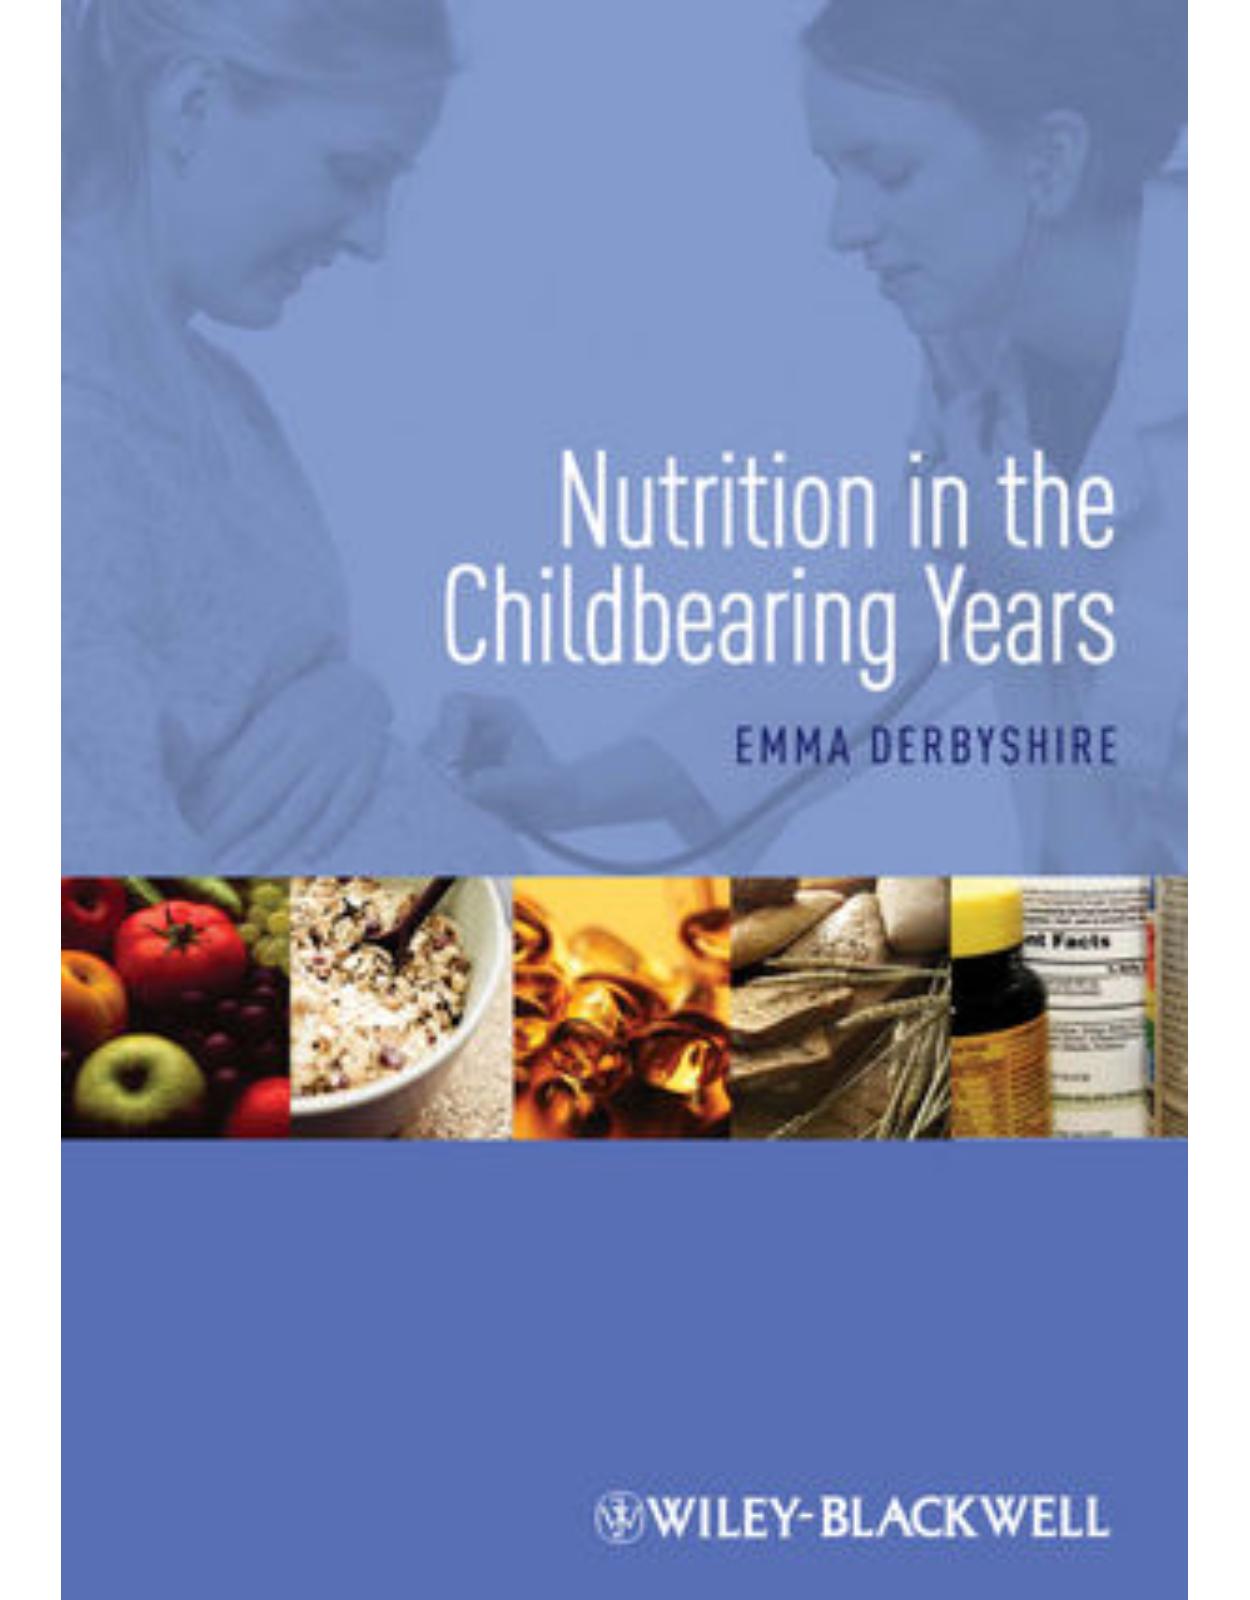 Nutrition in the Childbearing Years